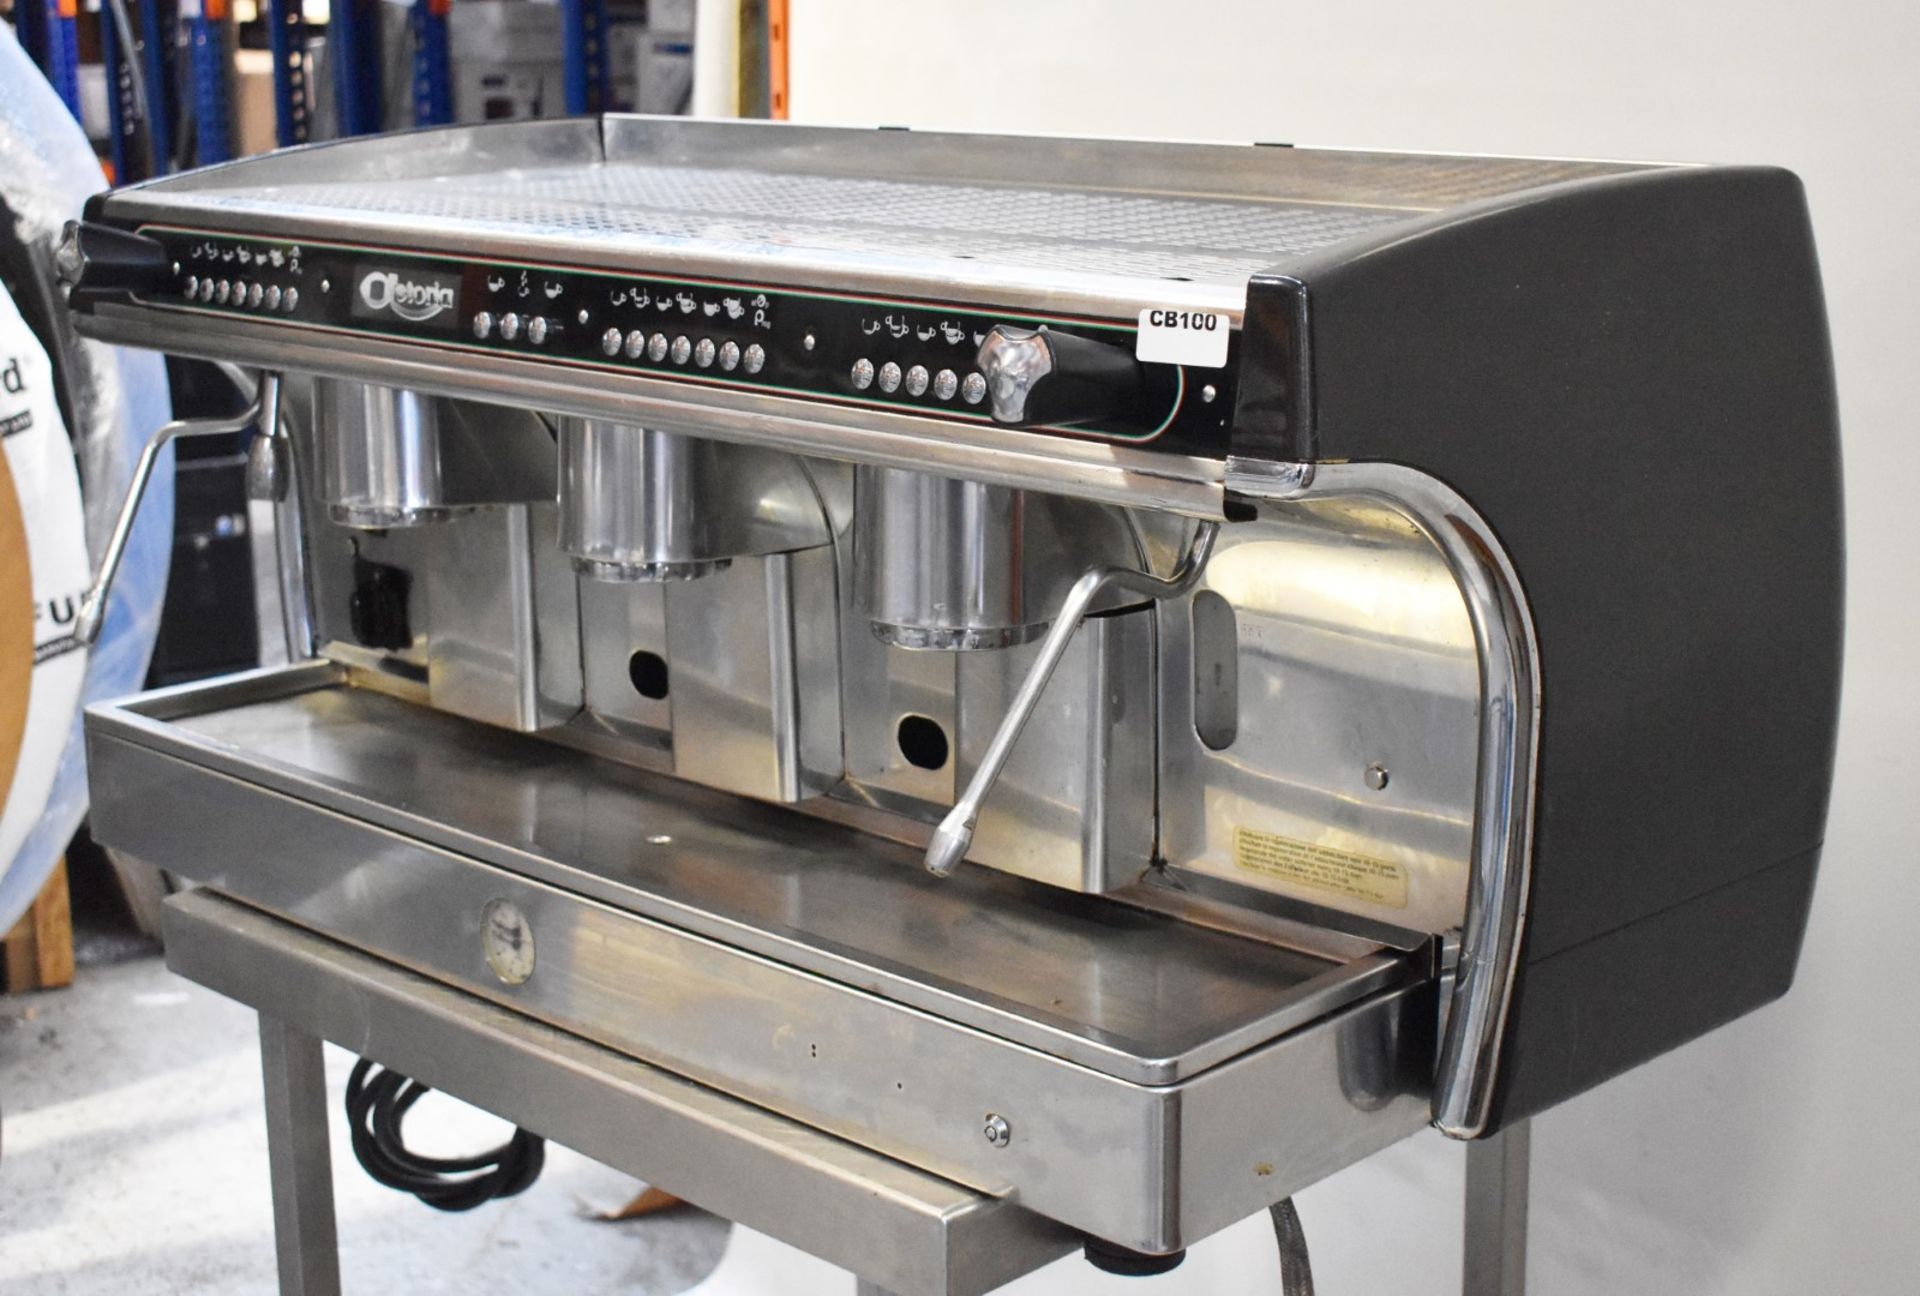 1 x Magrini 3 Group Coffee Espresso Machine With Stainless Steel and Black Finish - H47 x W106 x D57 - Image 5 of 9